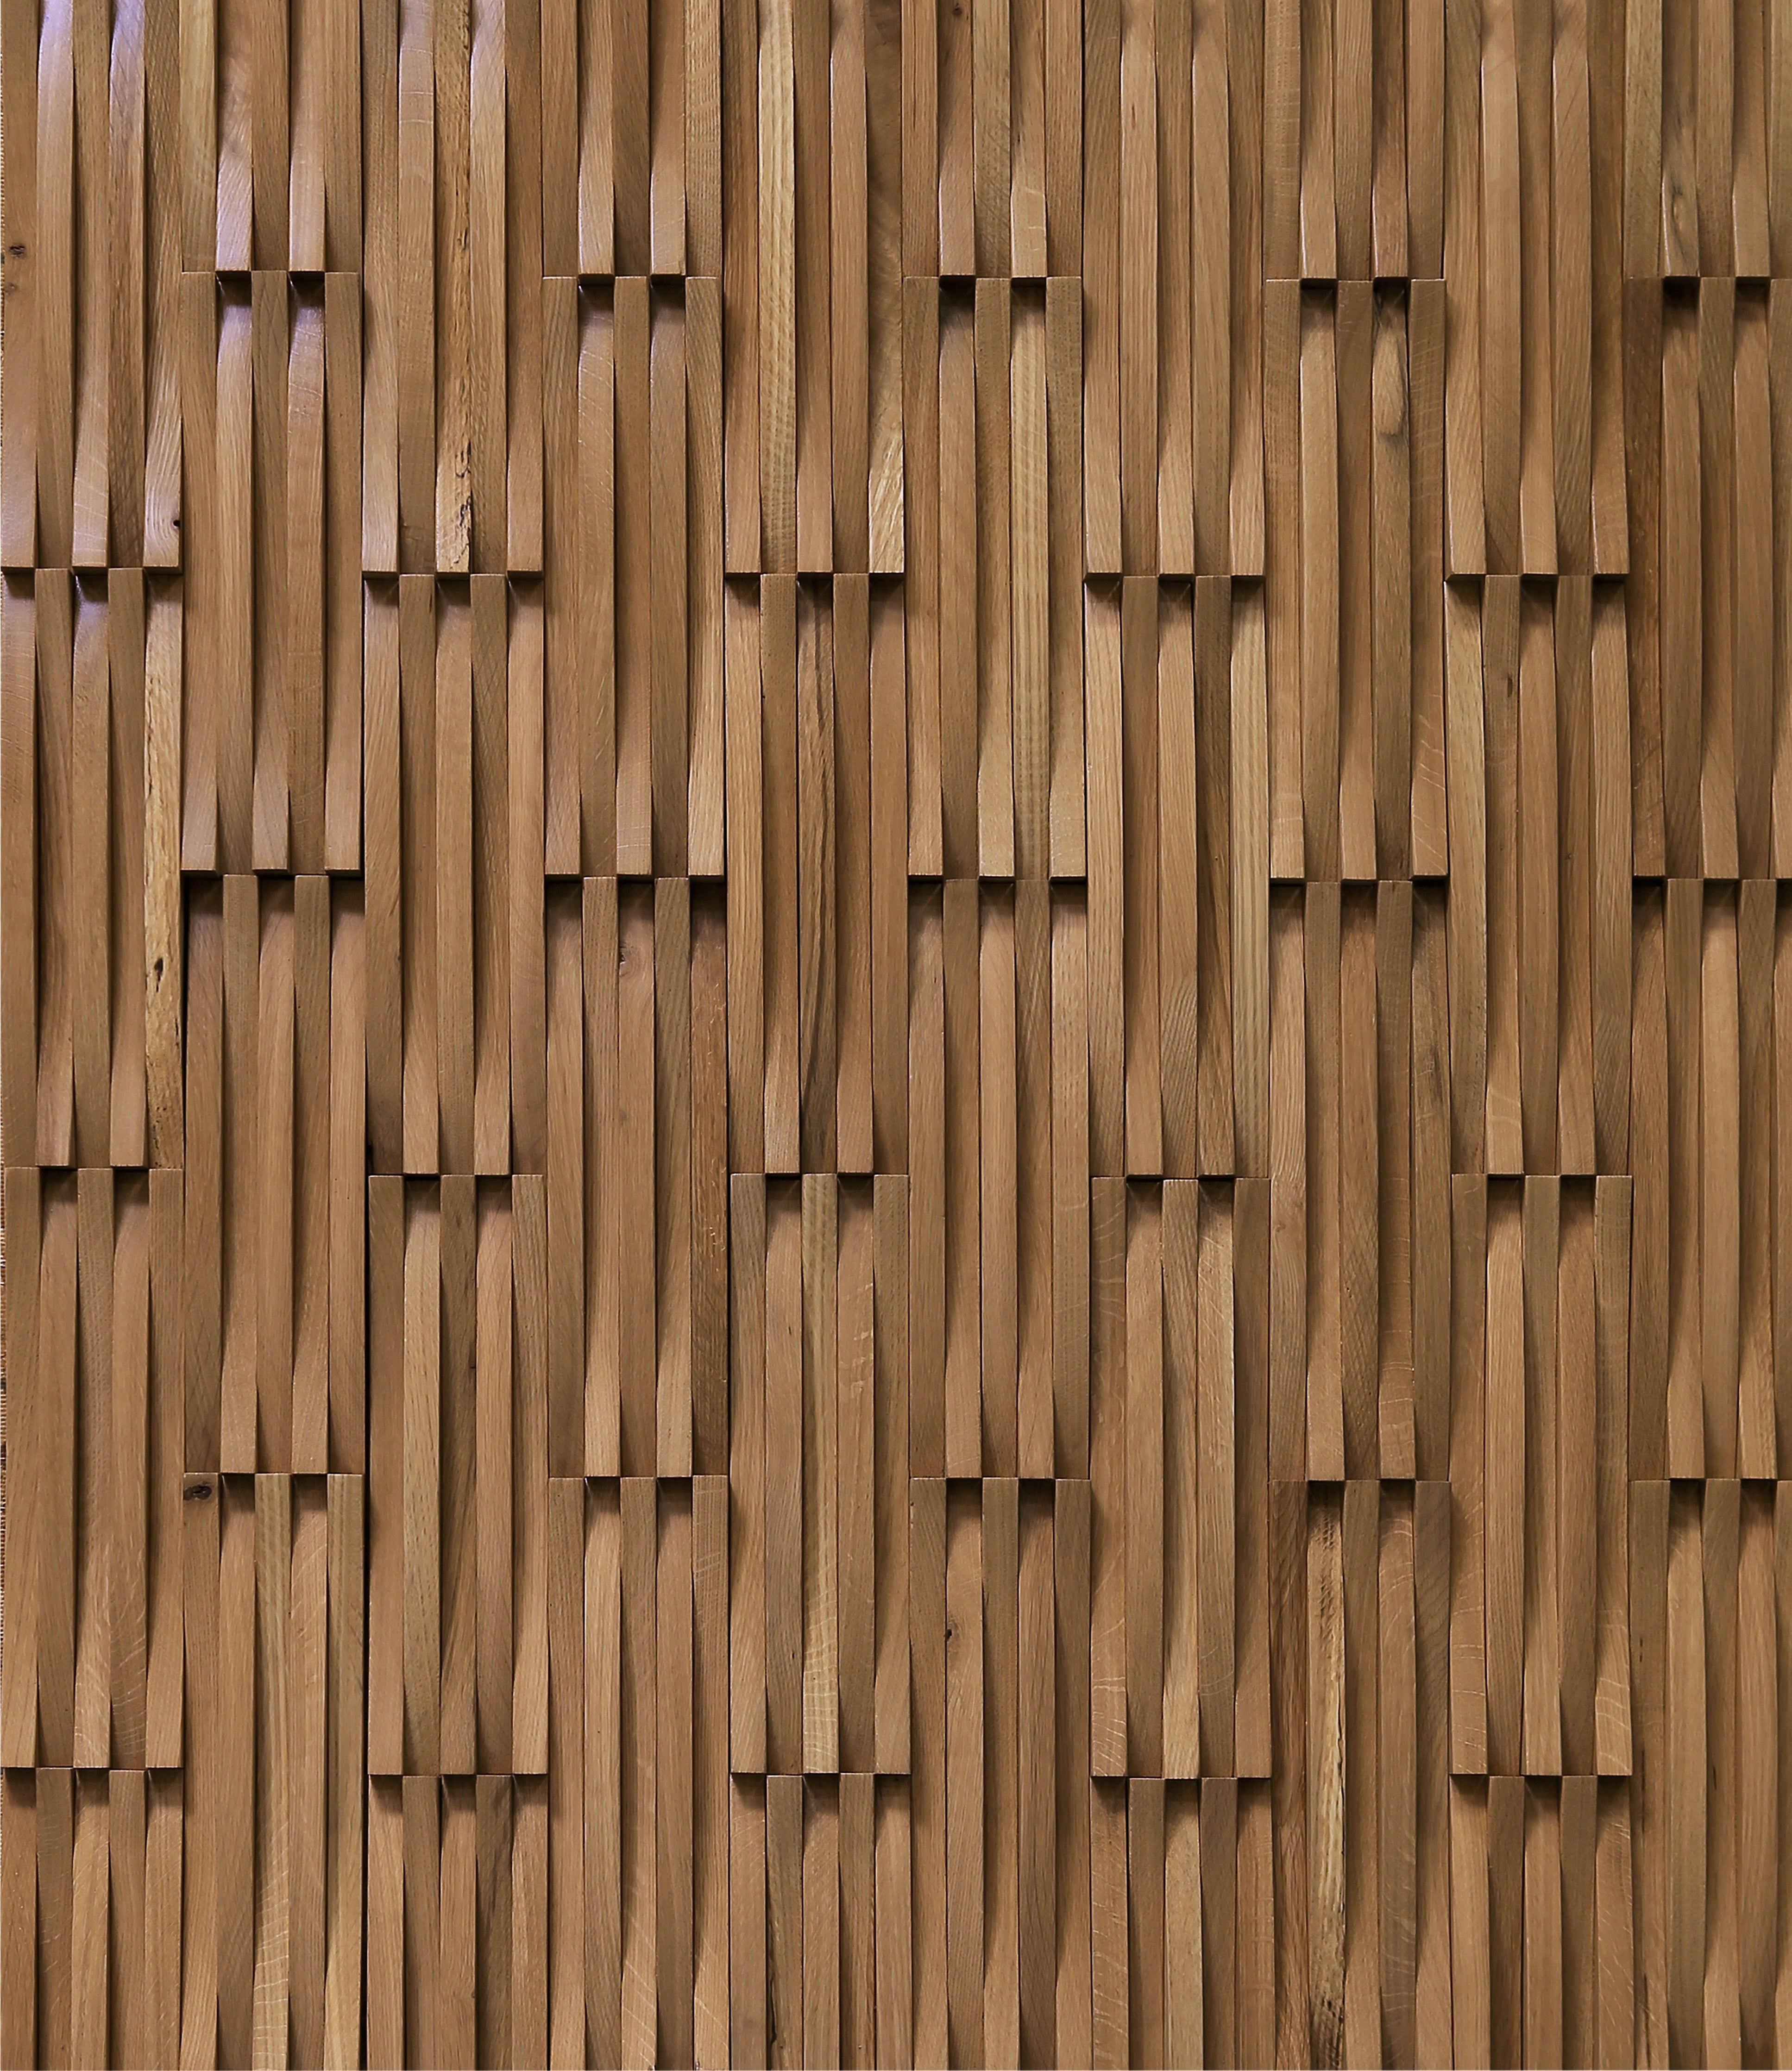 duchateau inceptiv curva olde dutch oak three dimensional wall natural wood panel lacquer for interior use distributed by surface group international